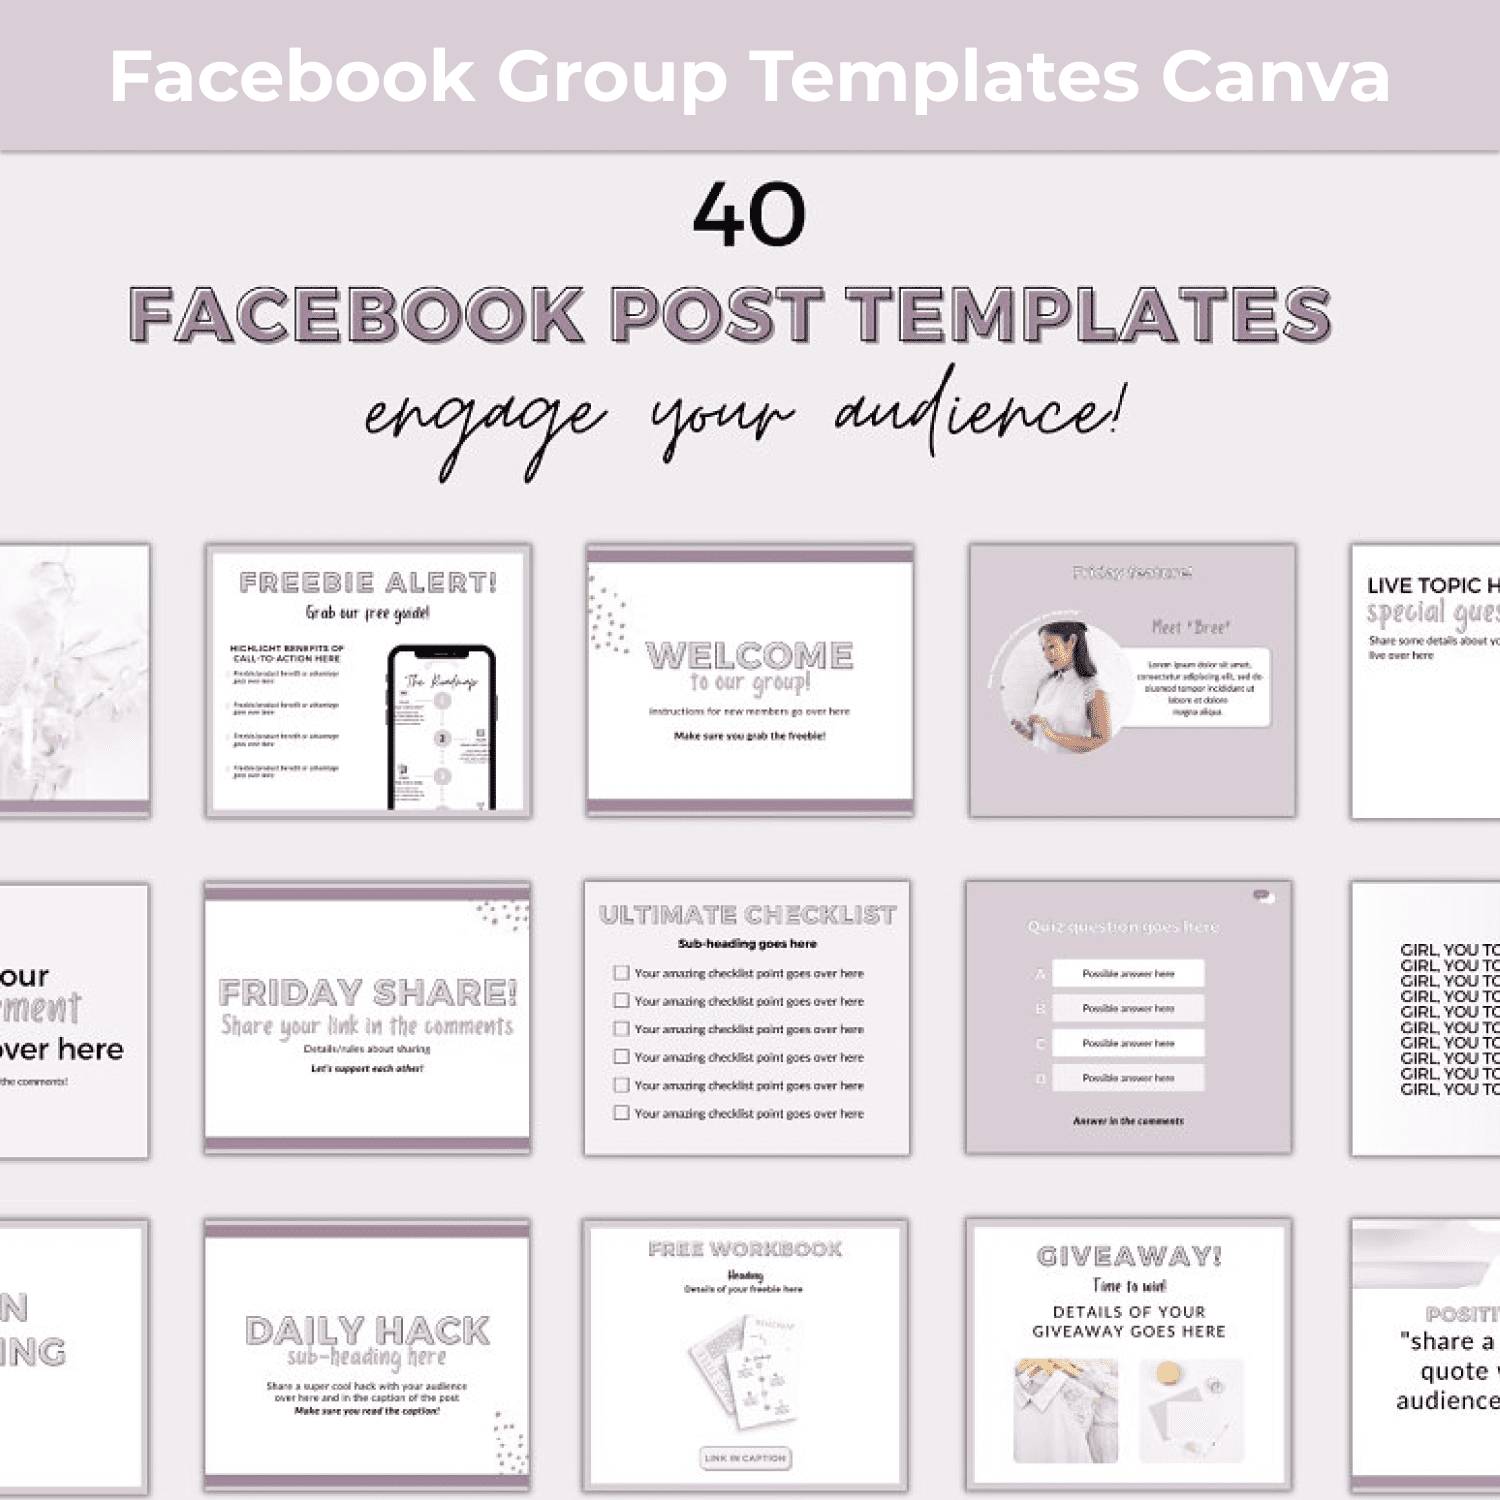 Facebook Group Templates Canva cover image.